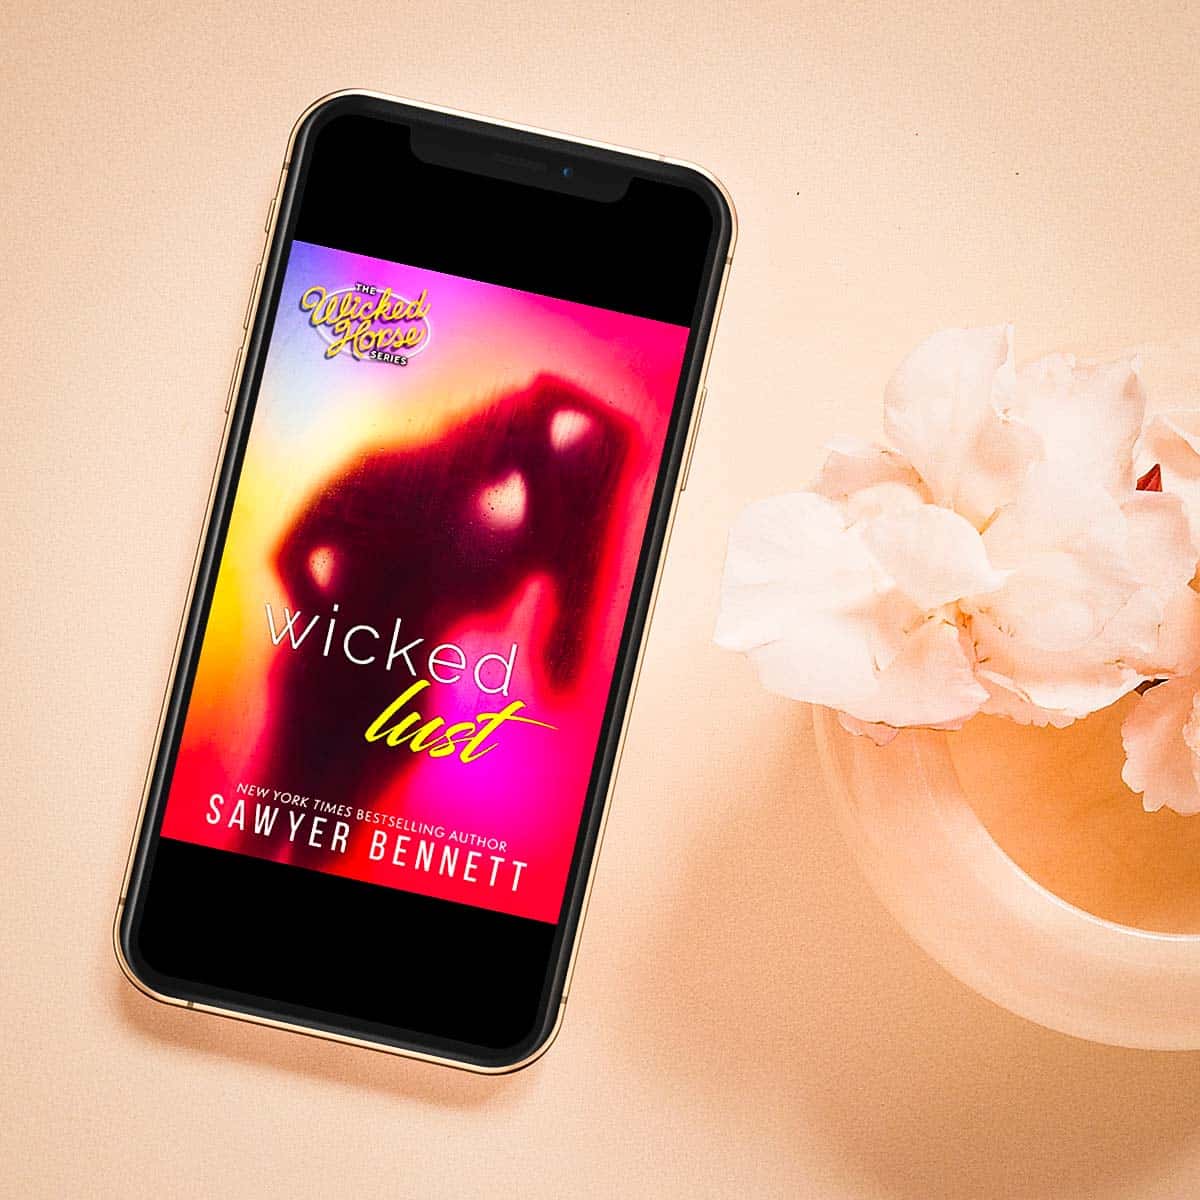 If you like your erotica with a little suspense, a little angst, and a lot of kink, Wicked Lust by Sawyer Bennett is right up your alley. (Wicked Horse Book 2)